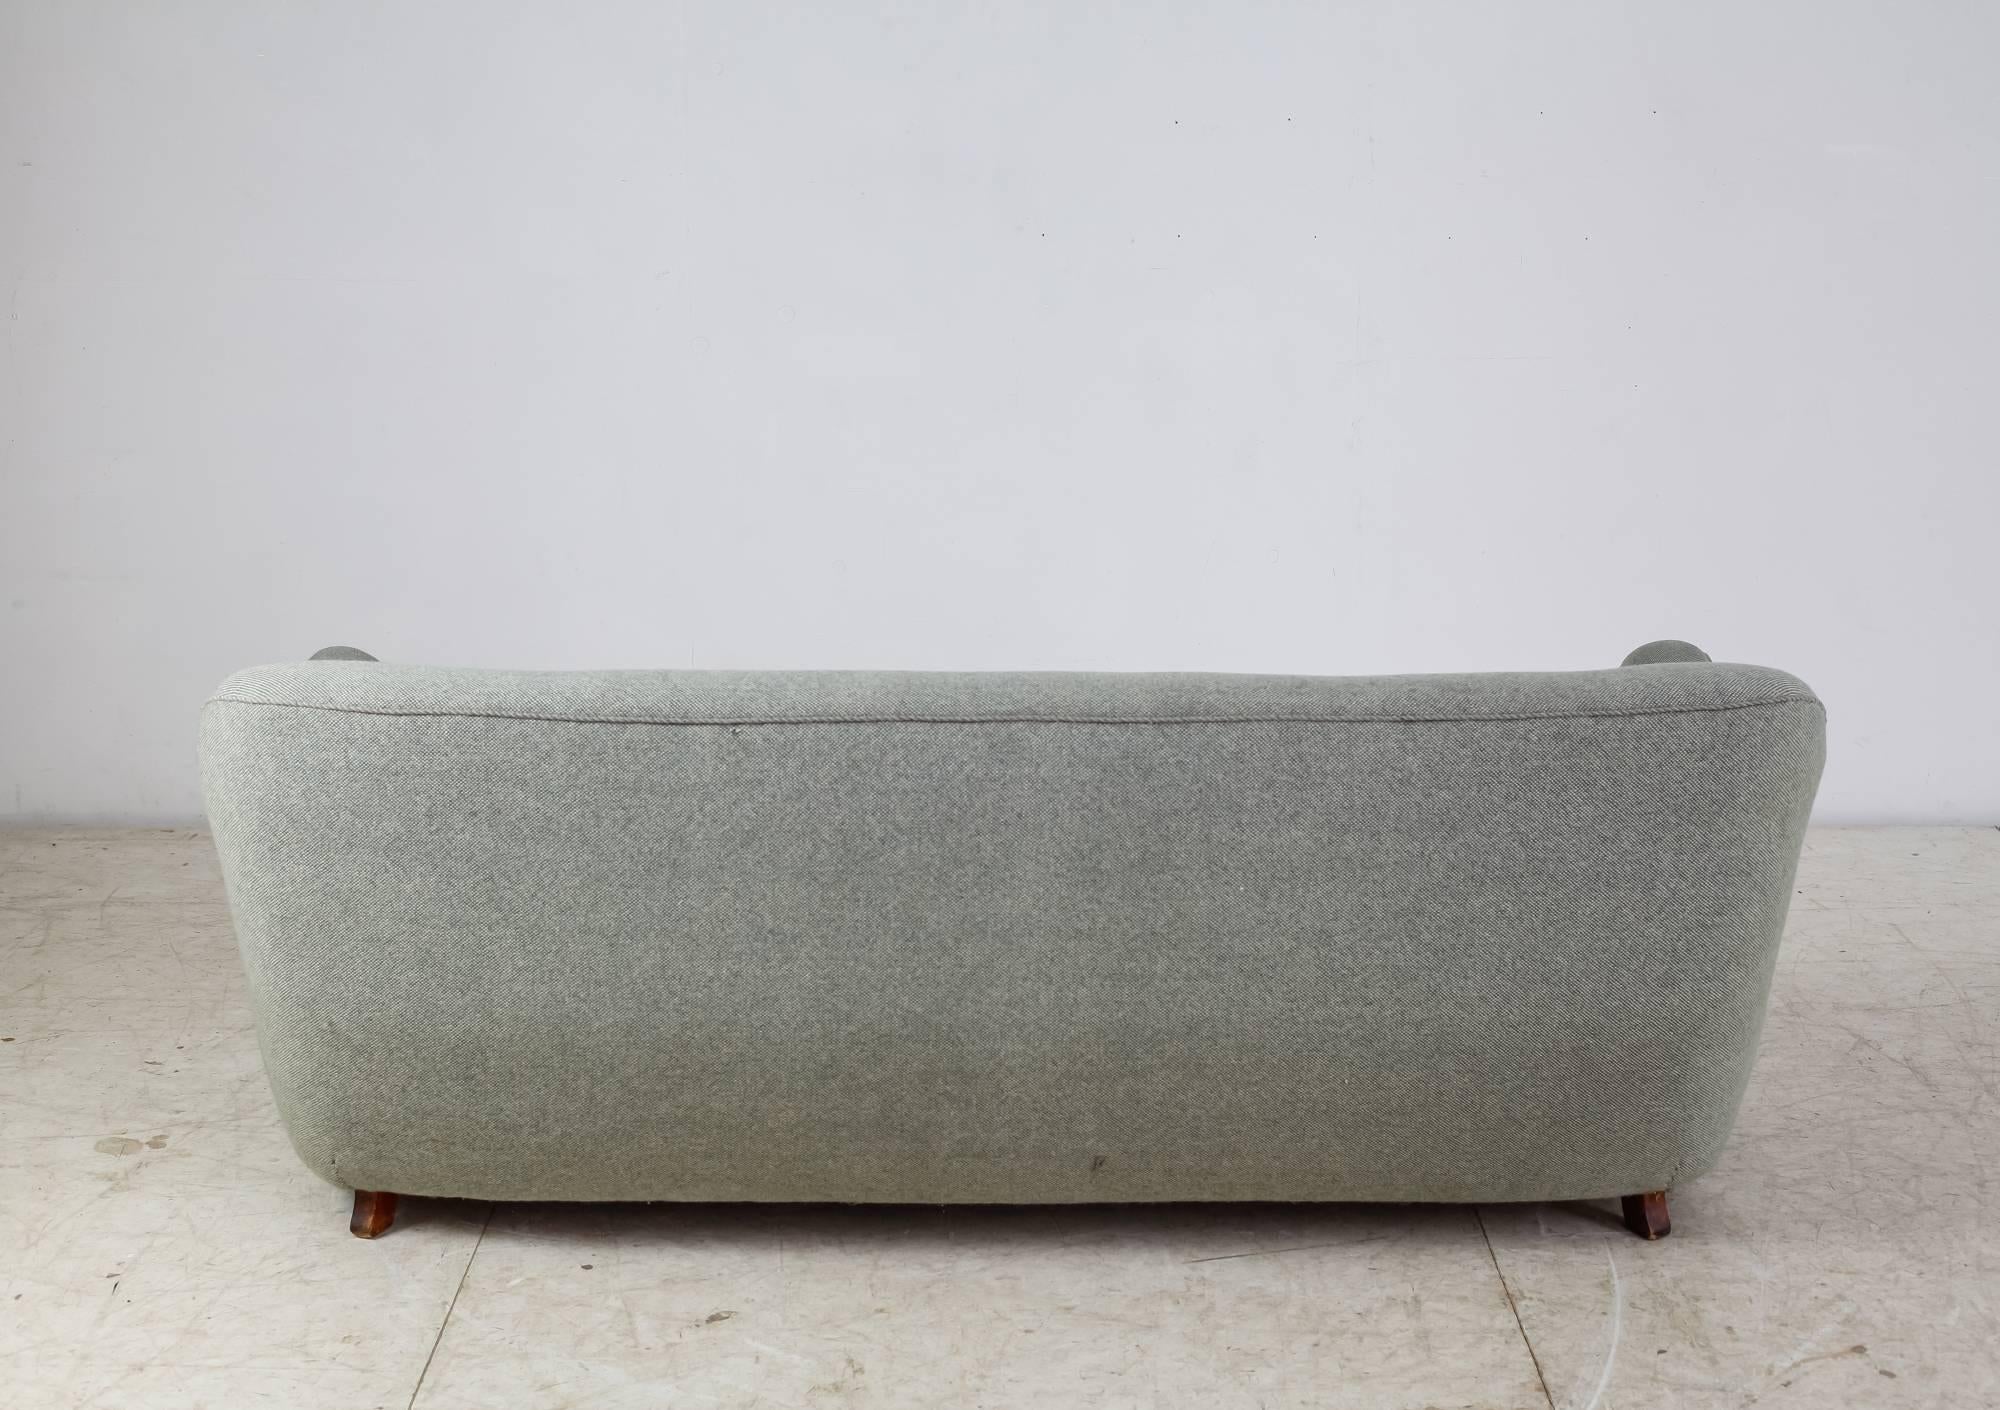 Danish Curved Three-Seat Sofa with Light Blue Fabric Upholstery, Denmark, 1930s For Sale